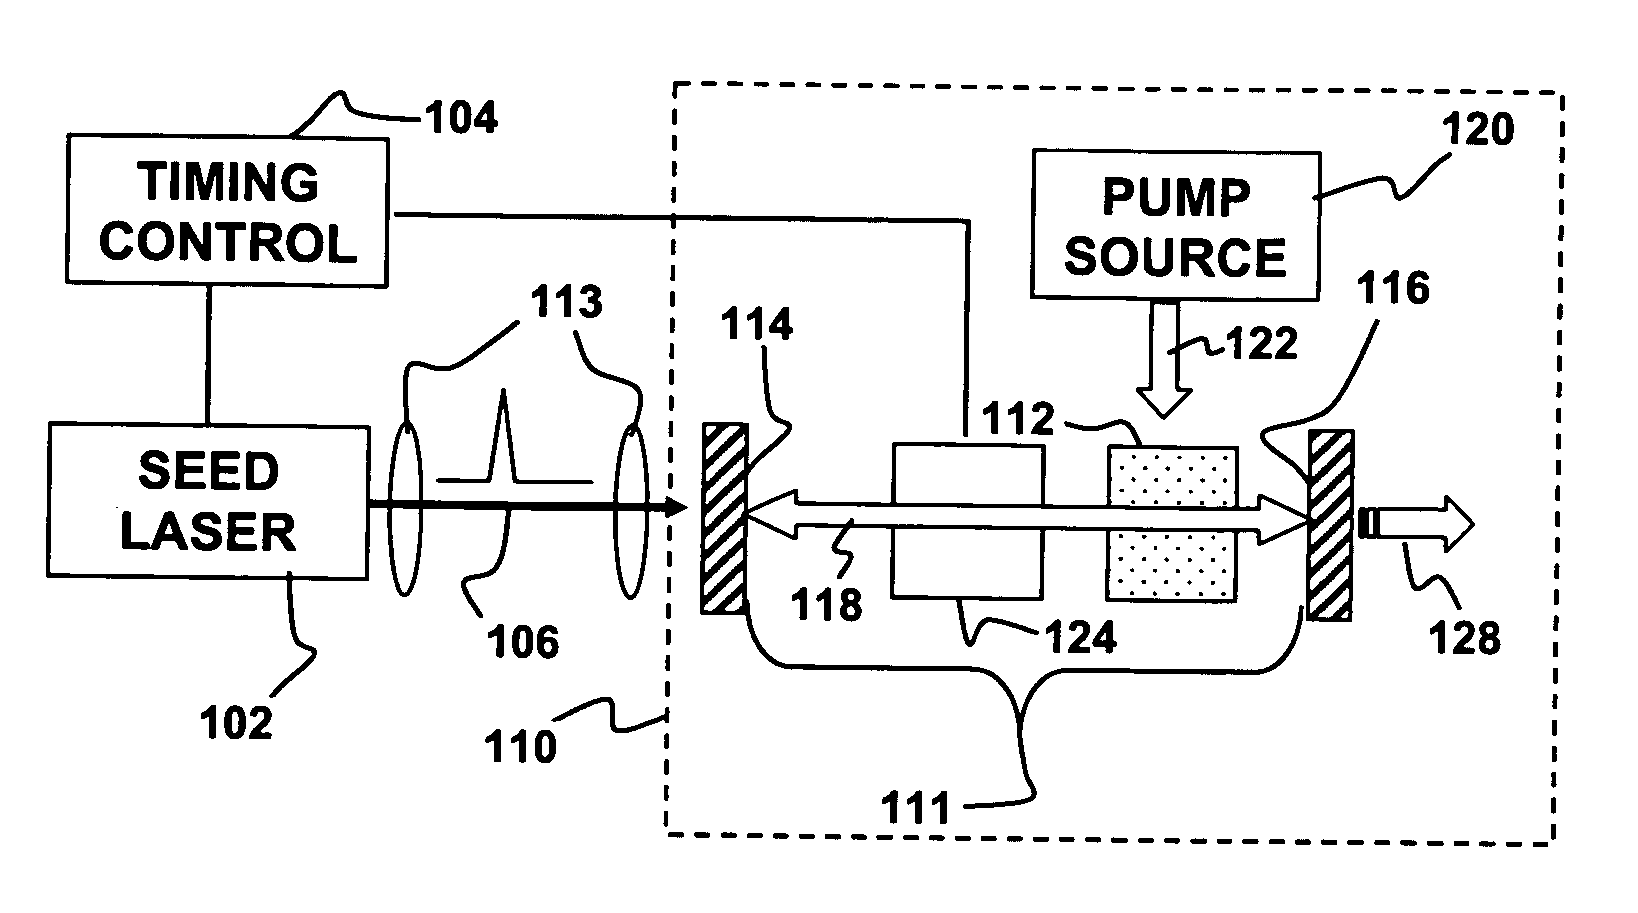 Injection seeding of frequency-converted Q-switched laser